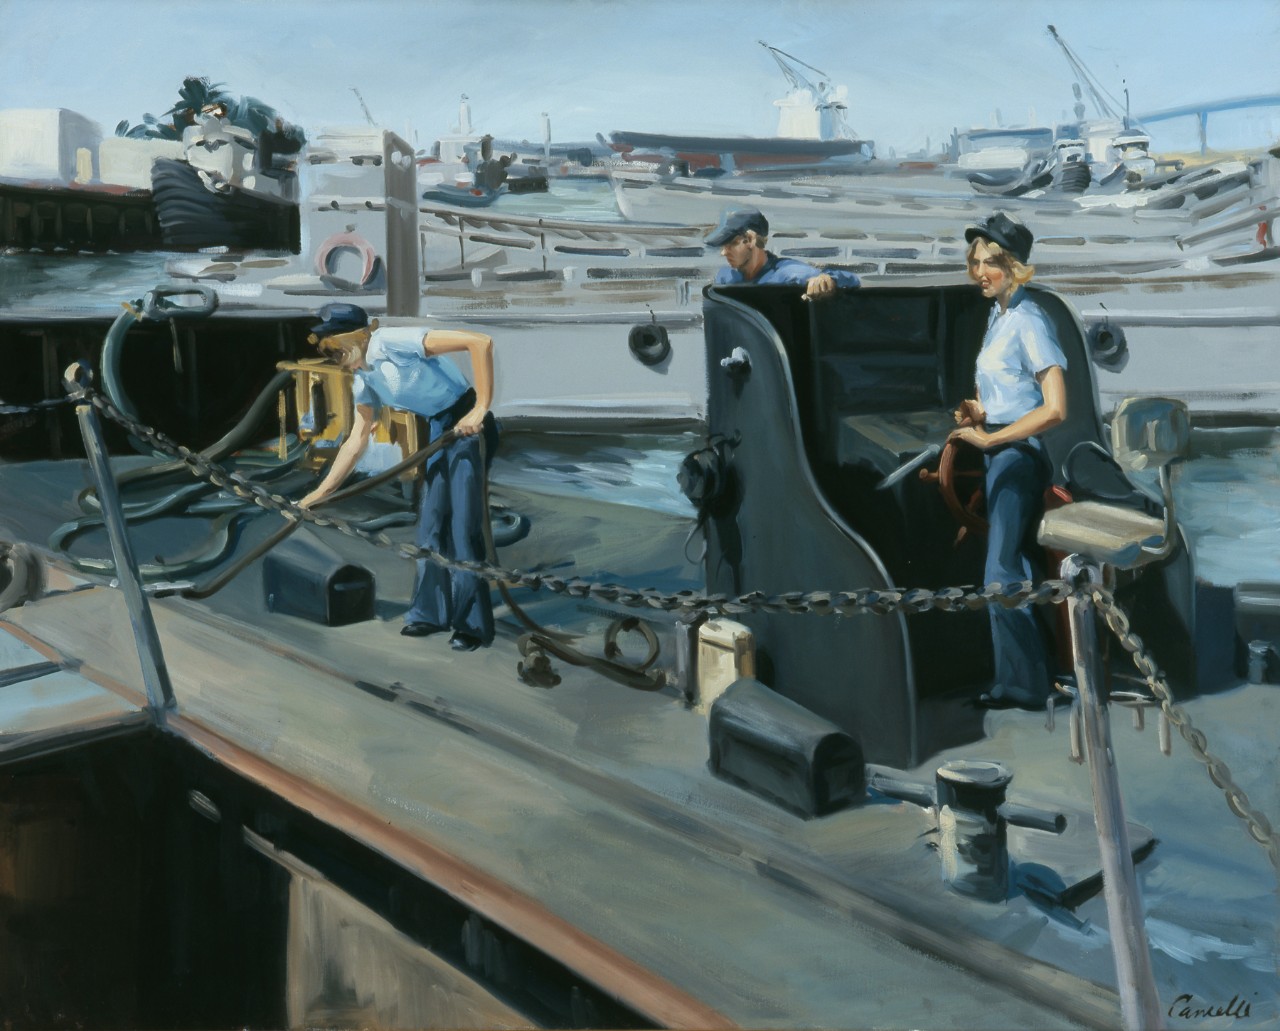 Three women working on a barge